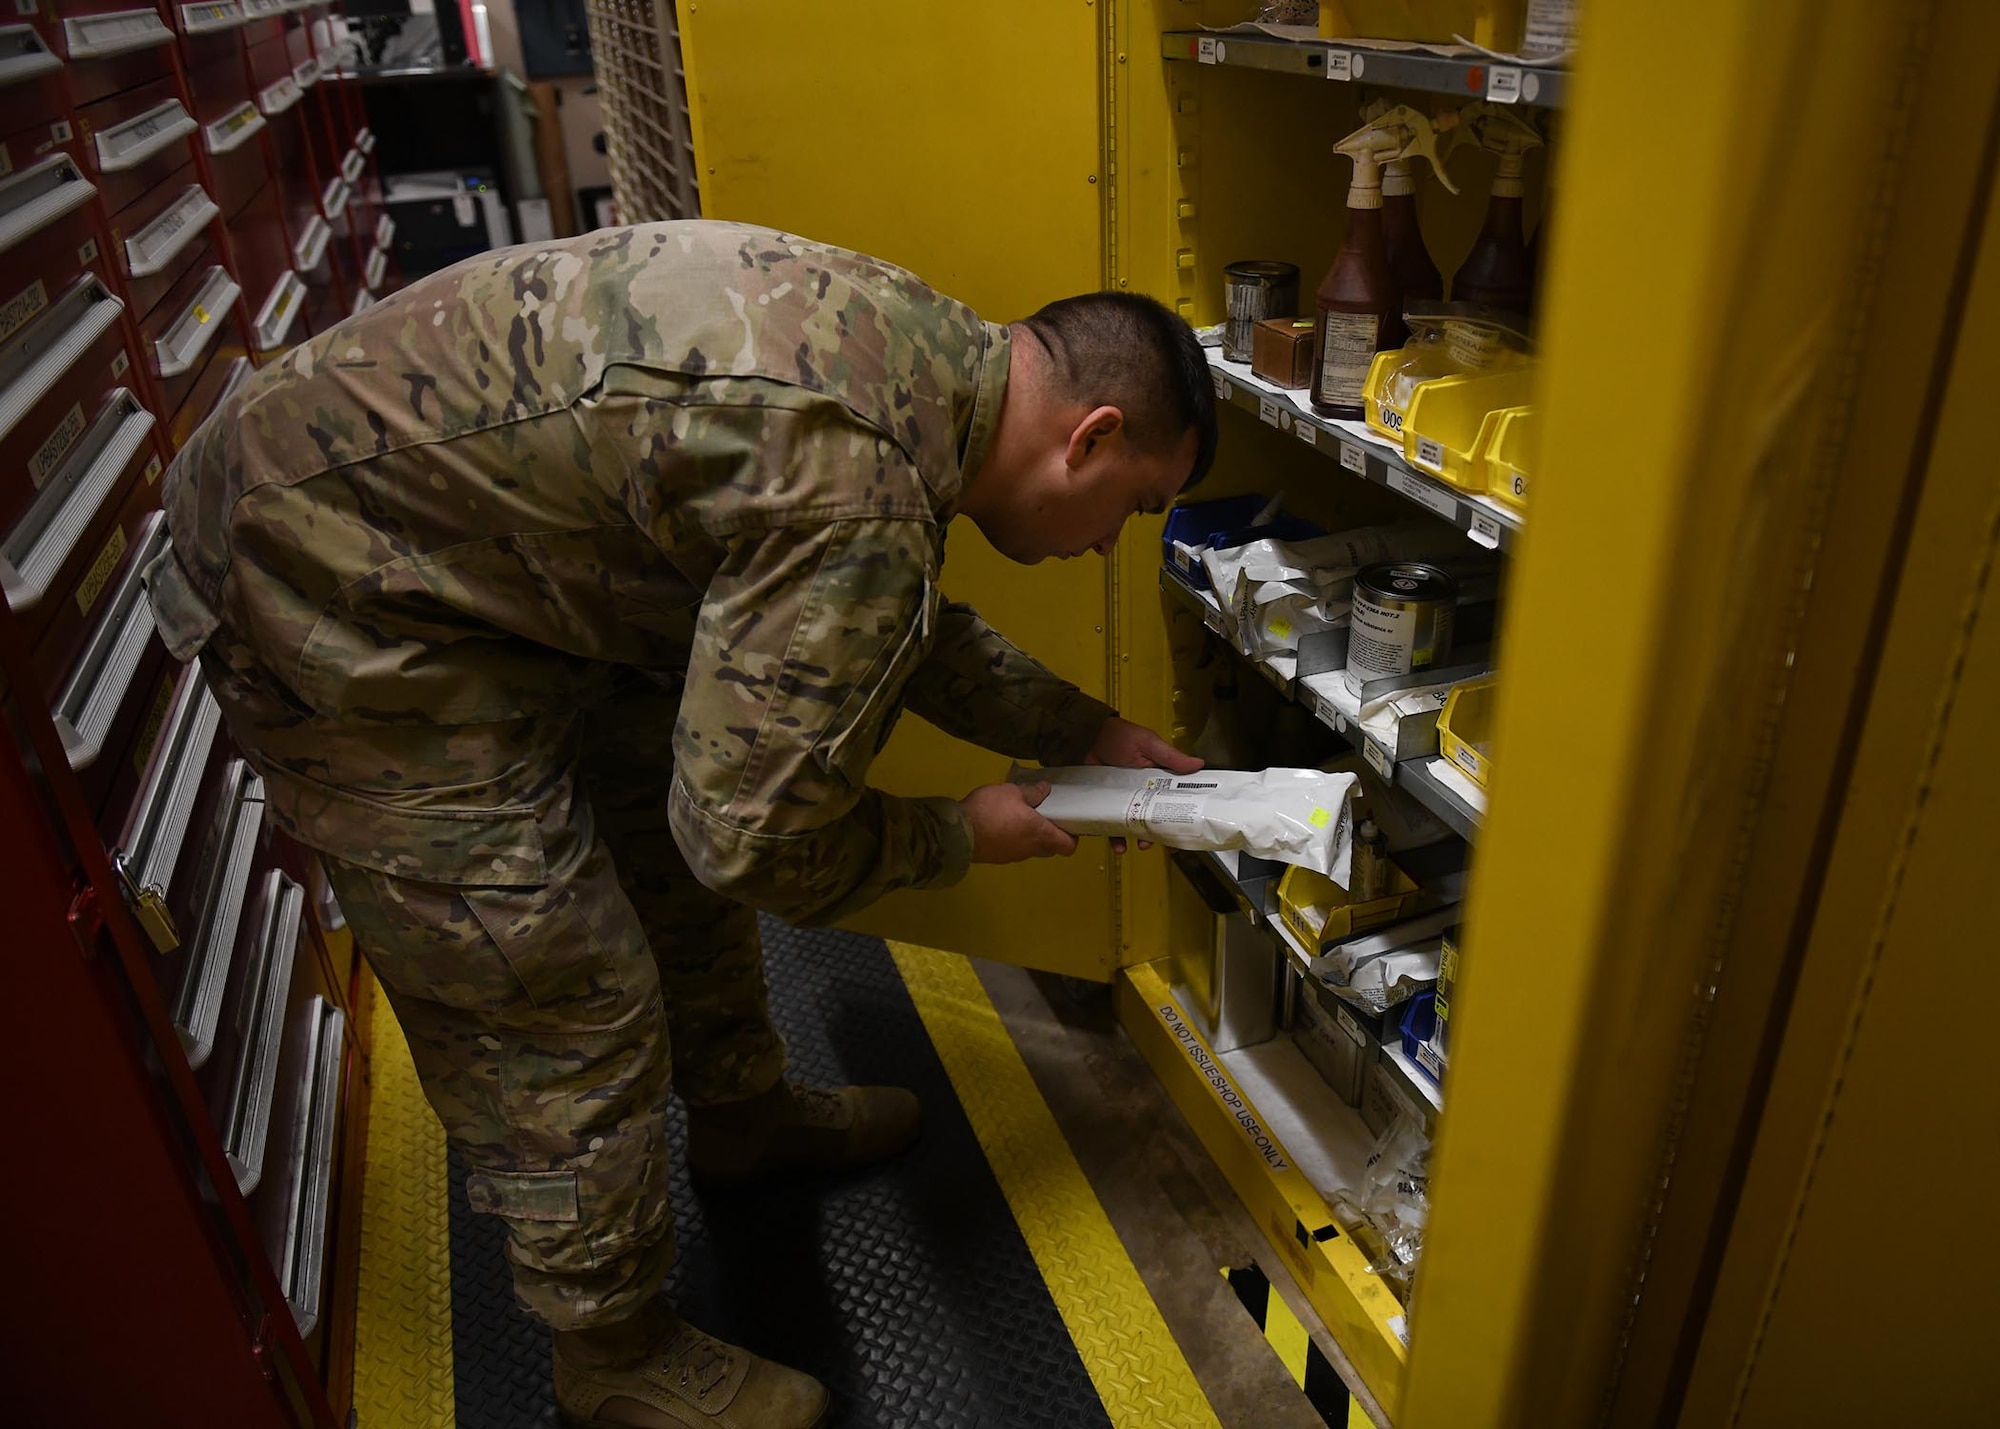 An Airman looks inside a yellow storage container.